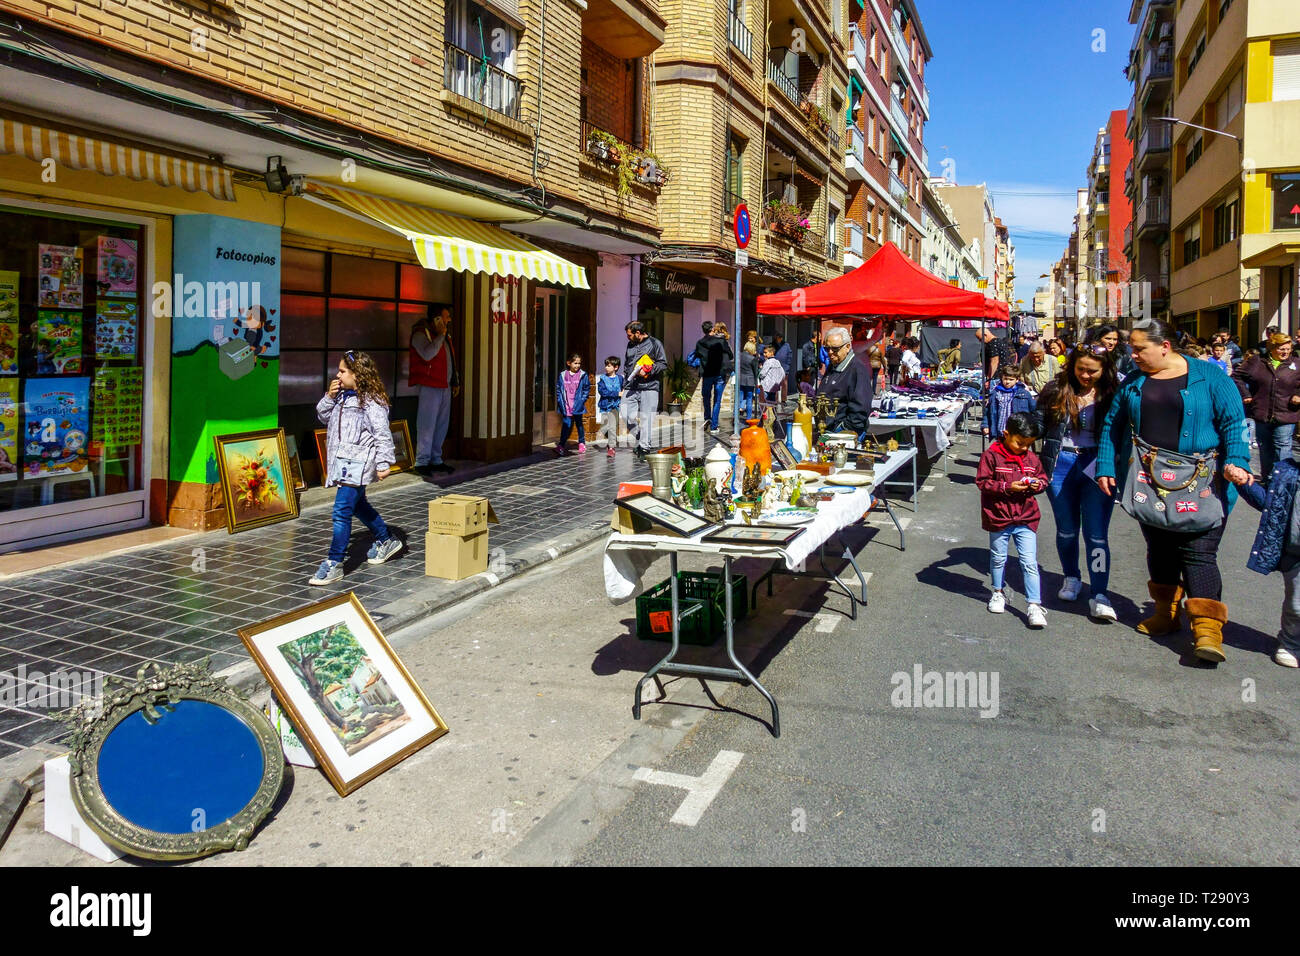 Every Thursday in Valencia El Cabanyal Canyamelar district is a traditional Valencia street market Spain streets weekly market Stock Photo